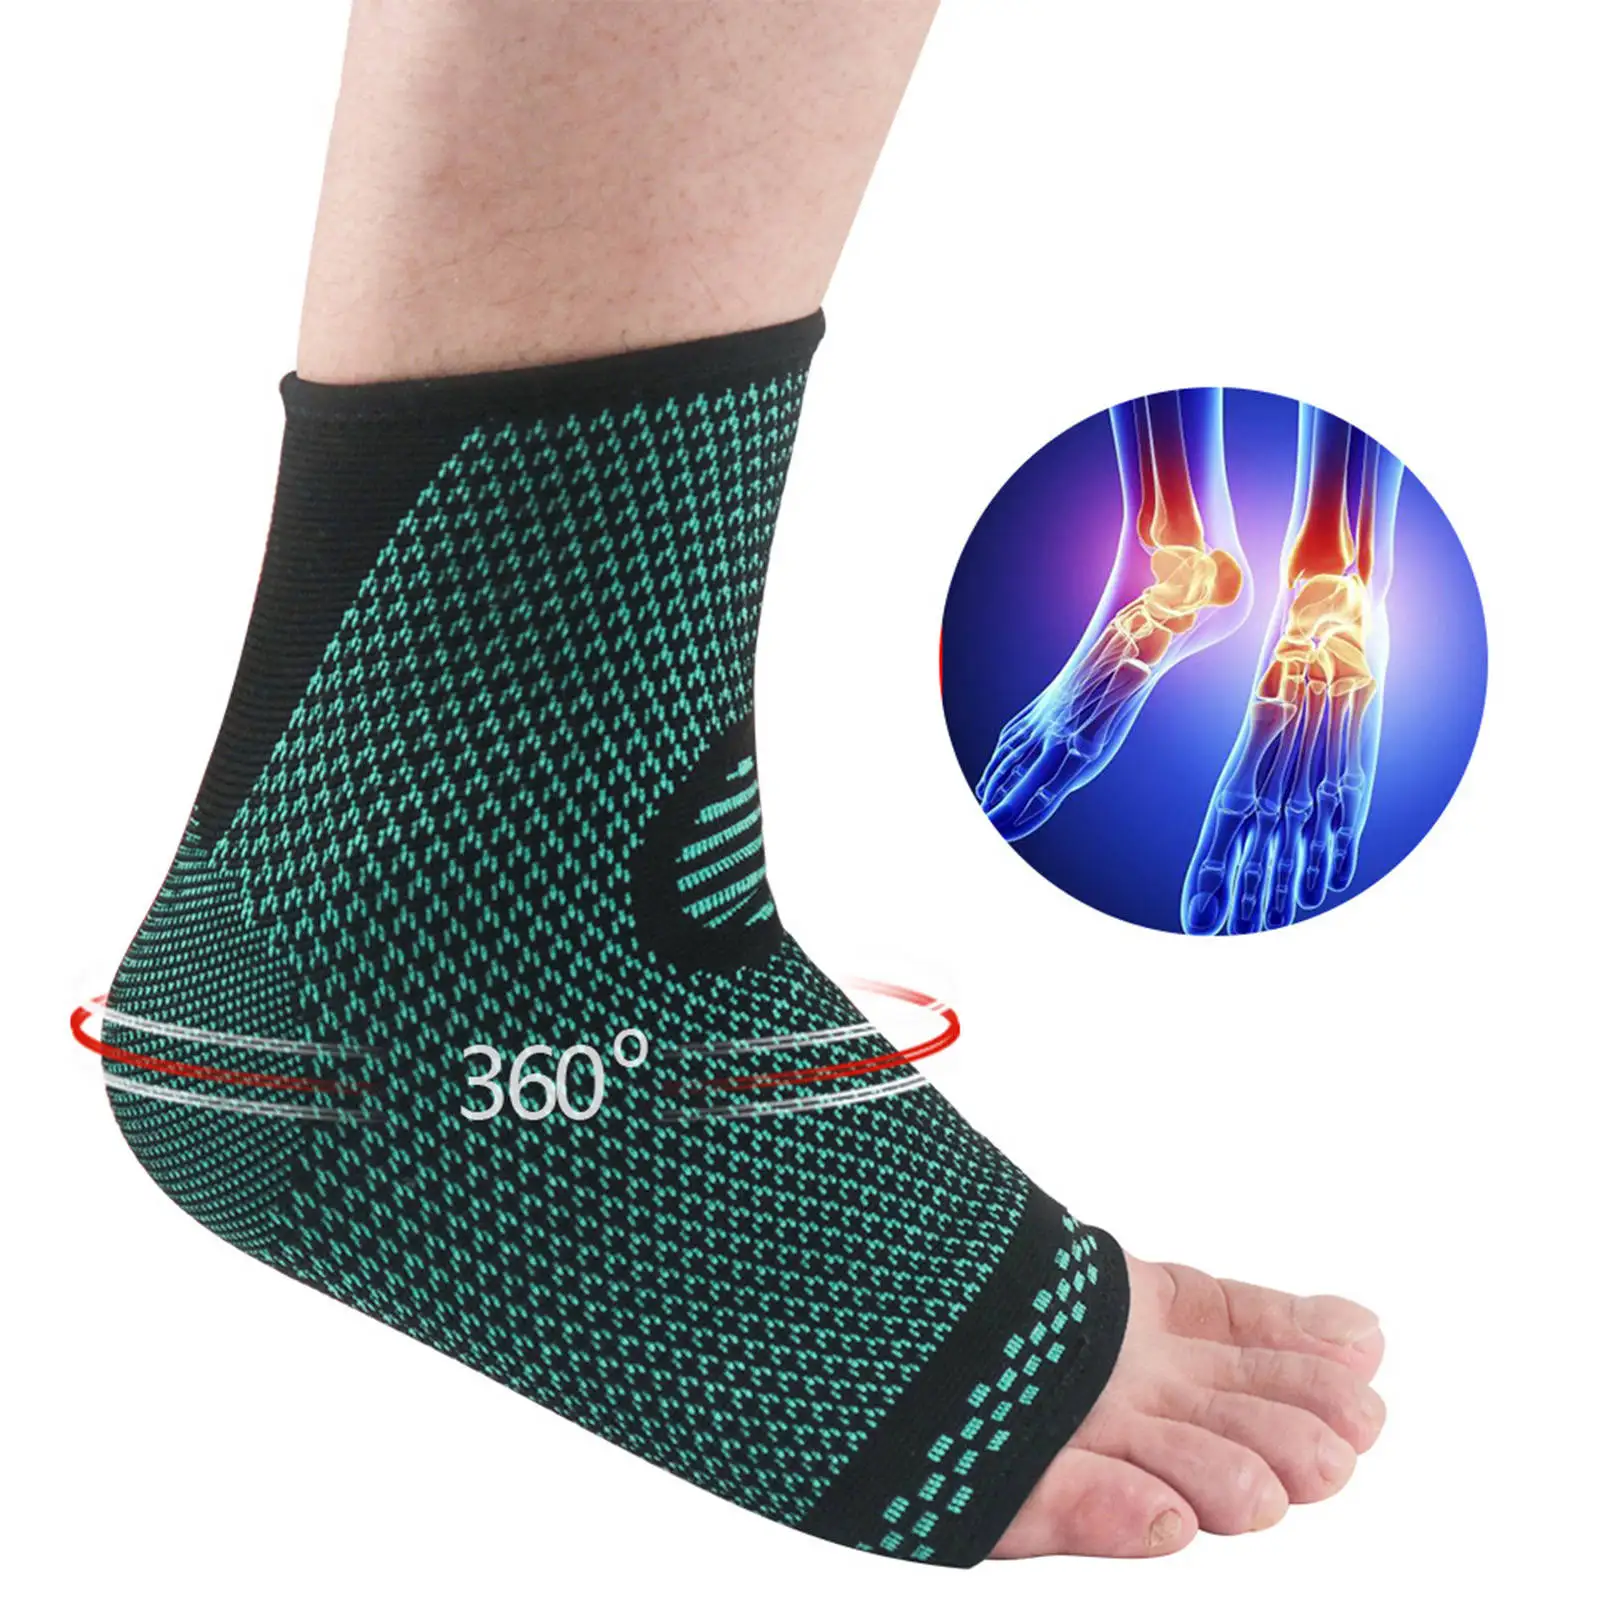 Anti fatigue compression foot sleeve Ankle Support Running Cycle Basketball Sports Socks Outdoor Ankle Brace Sock